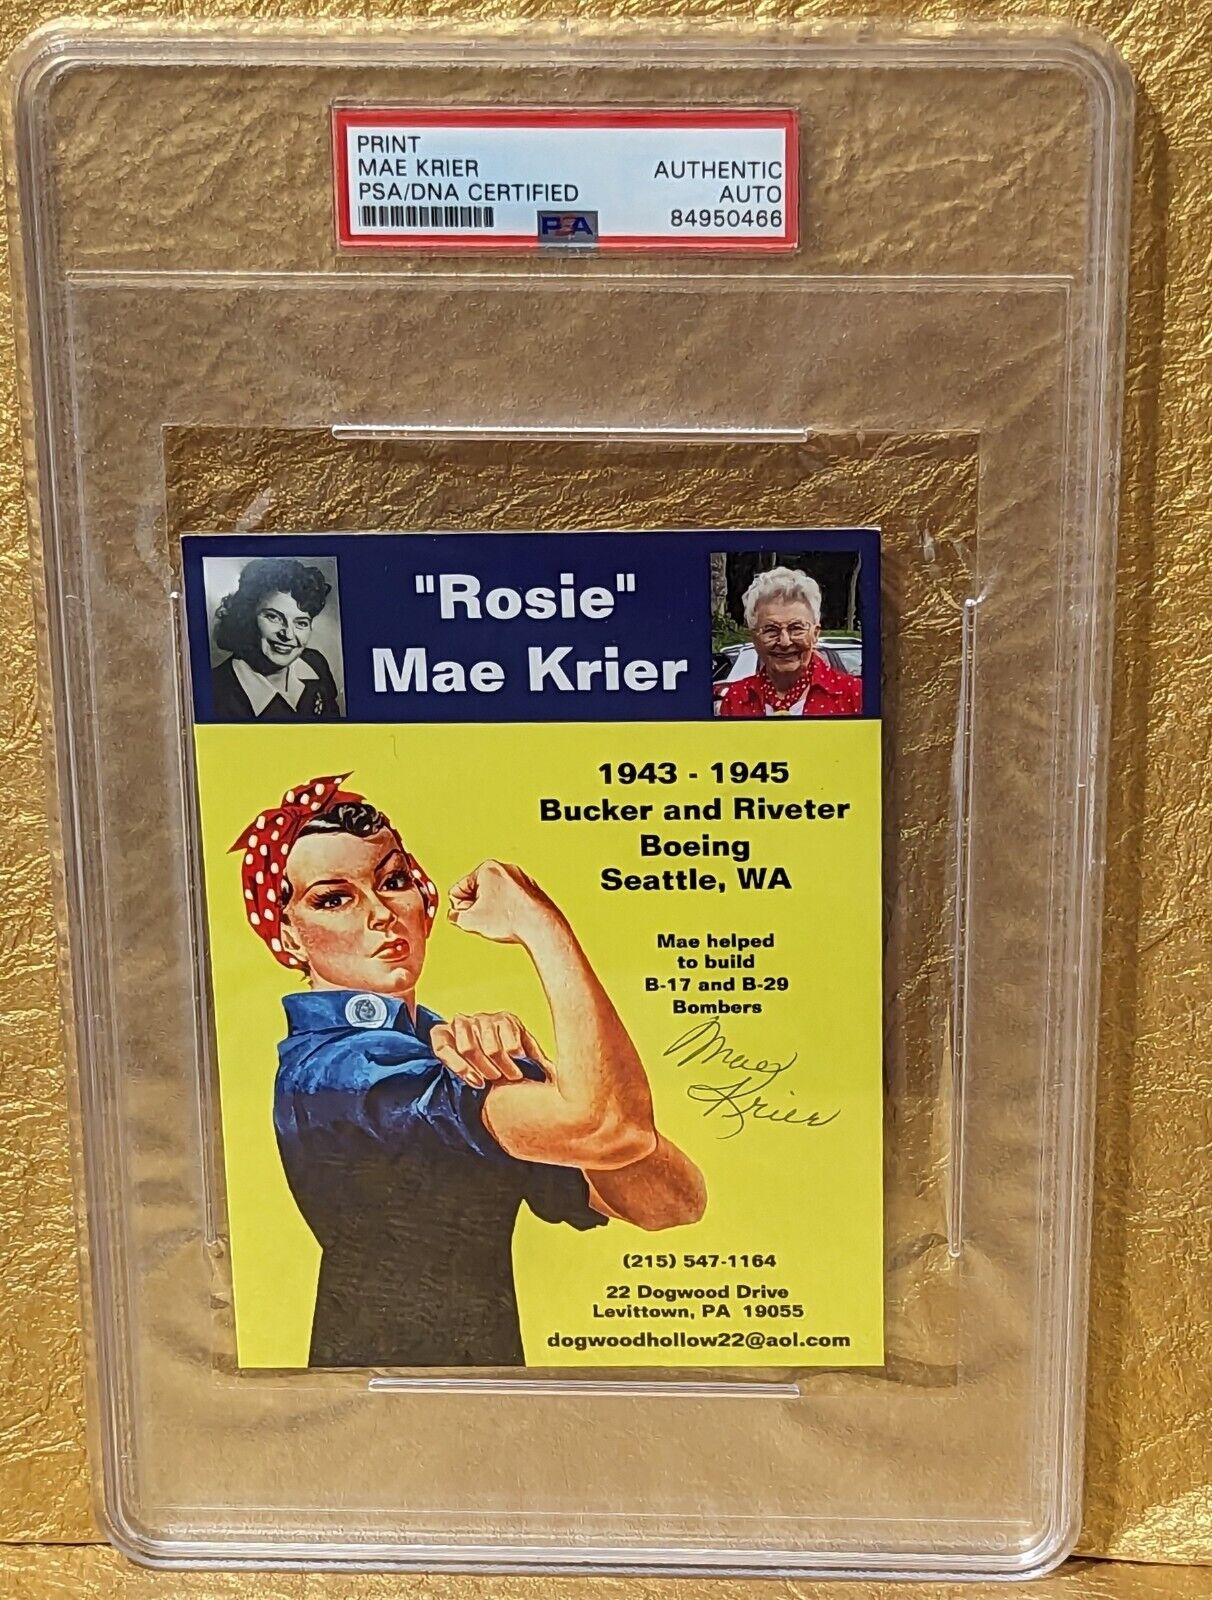 PSA Rosie Mae Krier Autograph ~ Rosie the Riveter Signed Photo  🪖 ⭐Cult Icon